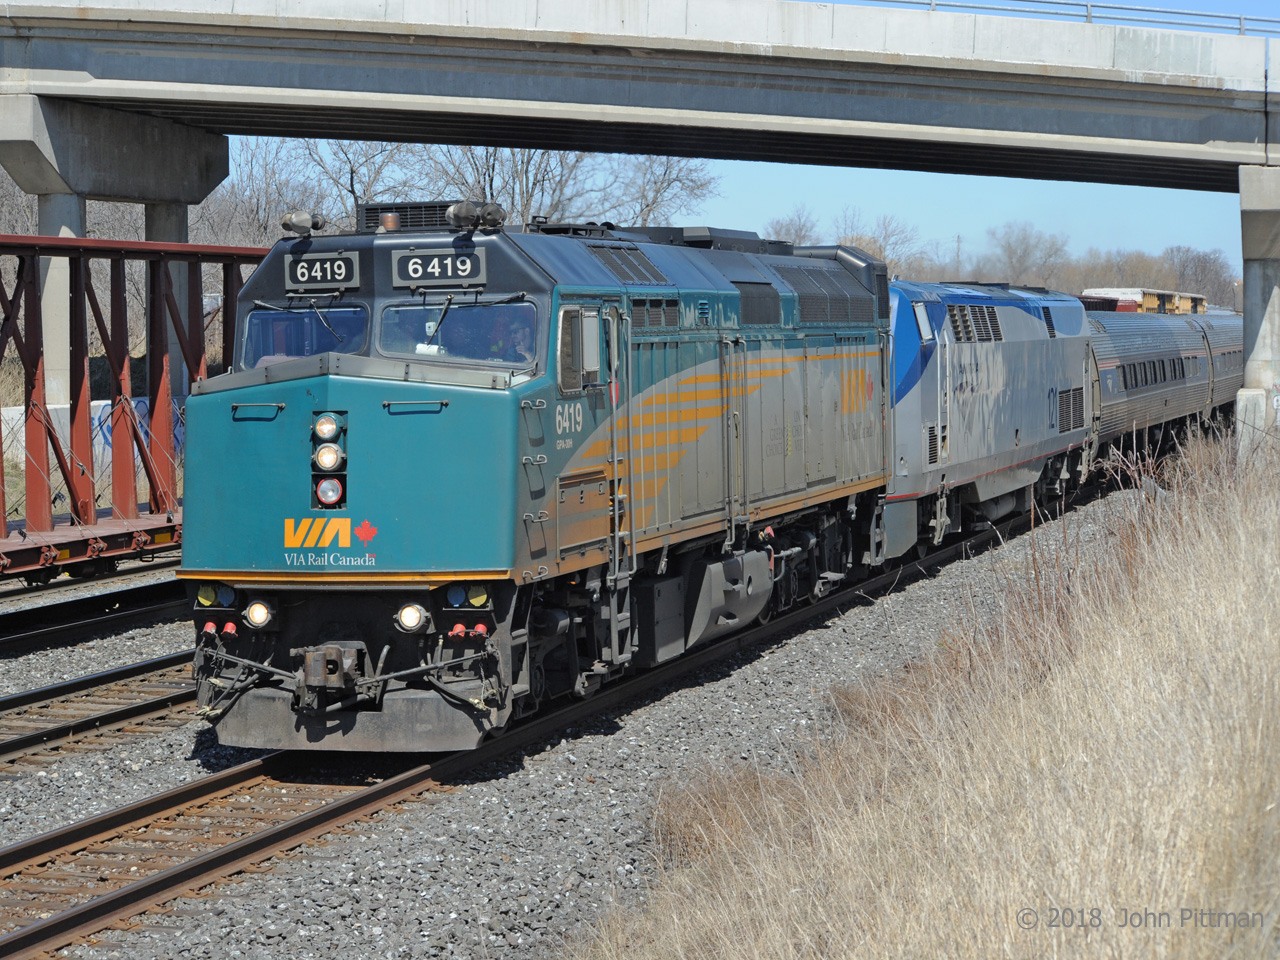 VIA 6419 leads defective AMTK 121 and train VIA 97 / Amtrak 64 at 2:18 PM, running about five and a quarter hours late at this point.  Congestion on the Oakville and Grimsby subs in Hamilton and beyond (CN freights 550 and 421 are ahead) would cause further delays.   Remarkably, it is making its third pass under Lemonville Road bridge this afternoon - photos taken from the bridge confirm that AMTK 121's diesel engine was running, perhaps providing head end power.  
The train had previously been down to the next control point, CN Snake (Road), waiting there for opposing train CN 422 to clear.  It was a surprise when VIA 97 reversed back to Aldershot Station for a brief stop.  My sympathies to the passengers.  
More about this off-schedule train can be found at:  http://www.railpictures.ca/?attachment_id=33078